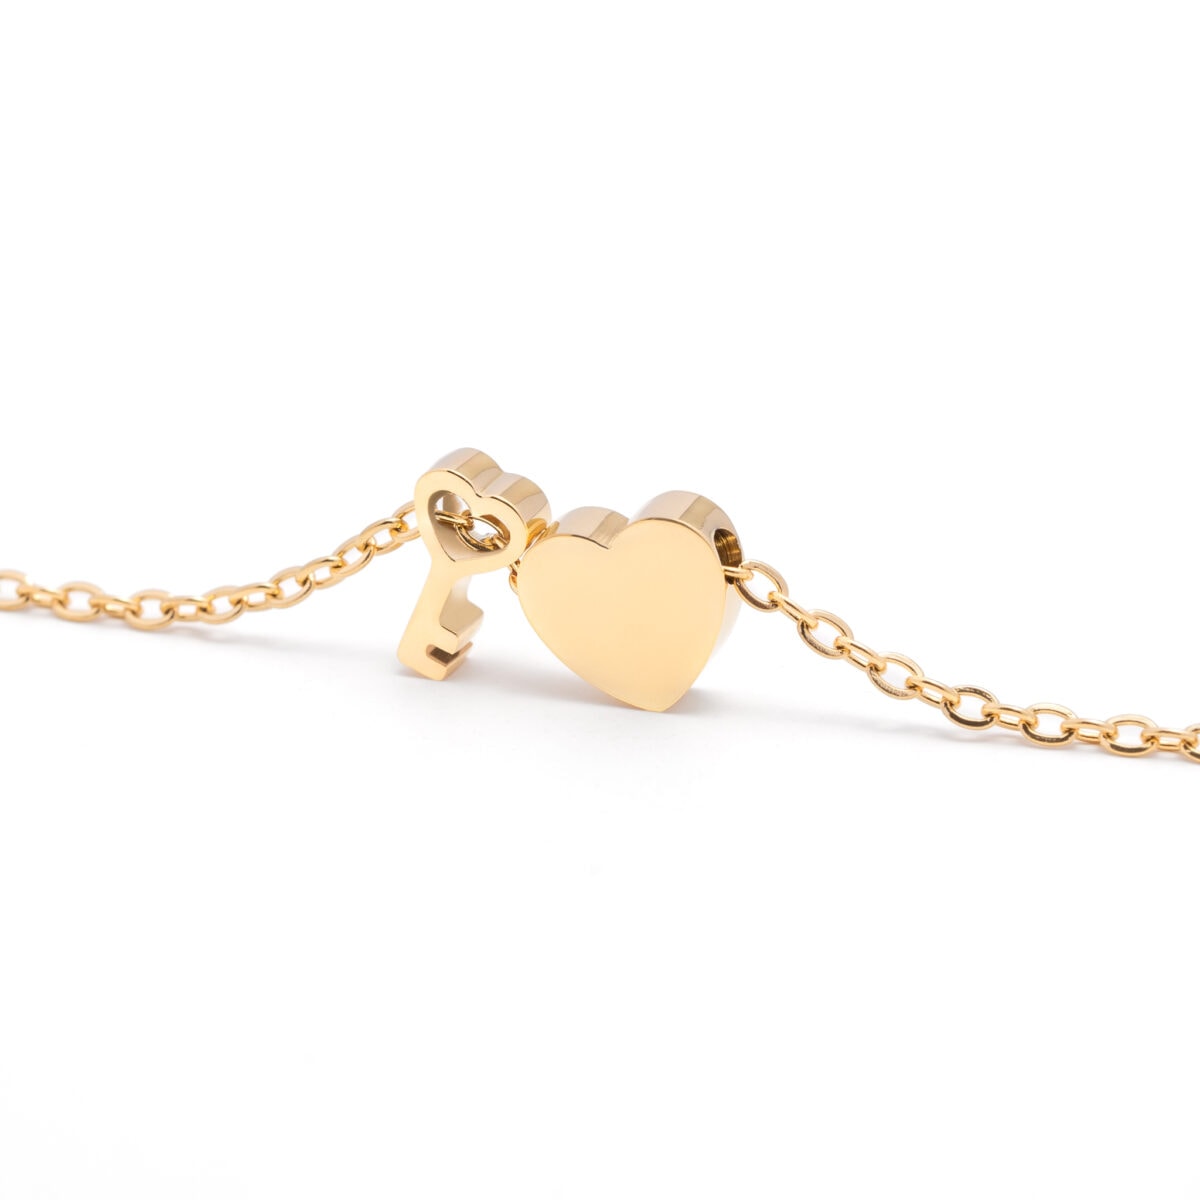 https://m.clubbella.co/product/key-to-thee-heart-gold-charm-bracelet/ Key to Thee Gold (1)